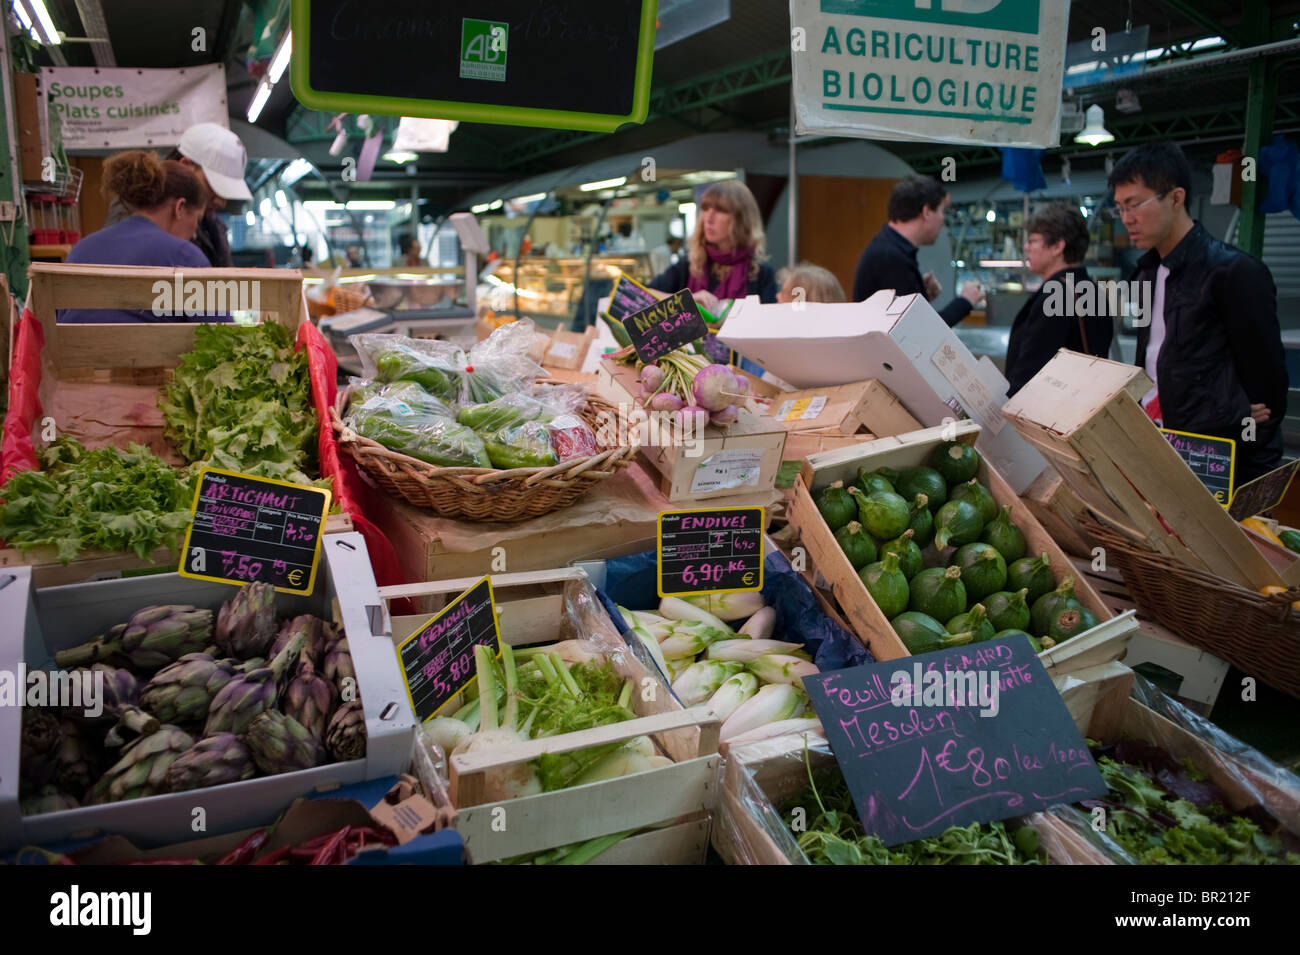 Paris, France, Small Group People, inside Food Markets, Organic Shopping, Vegetables in Farmer's Market, Le Marais District, 'Les Enfants Rouges' local consumption, food prices, greengrocer inside Stock Photo